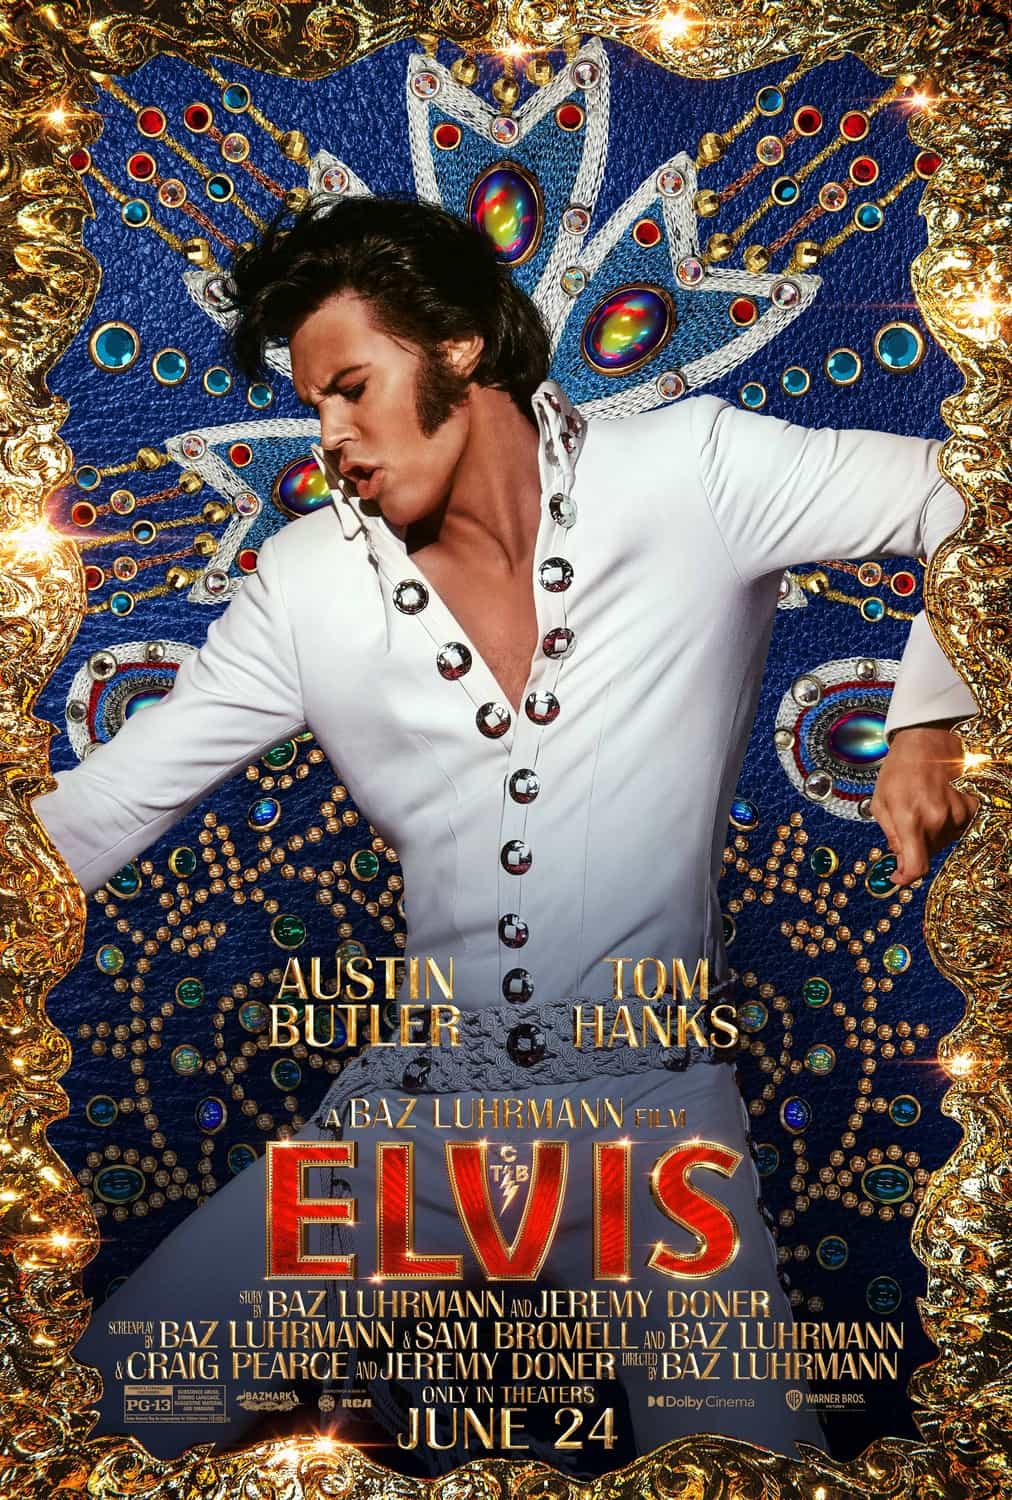 UK Box Office Weekend Report 24th - 26th June 2022: Elvis tops the UK box office on its debut weekend with £4 Million